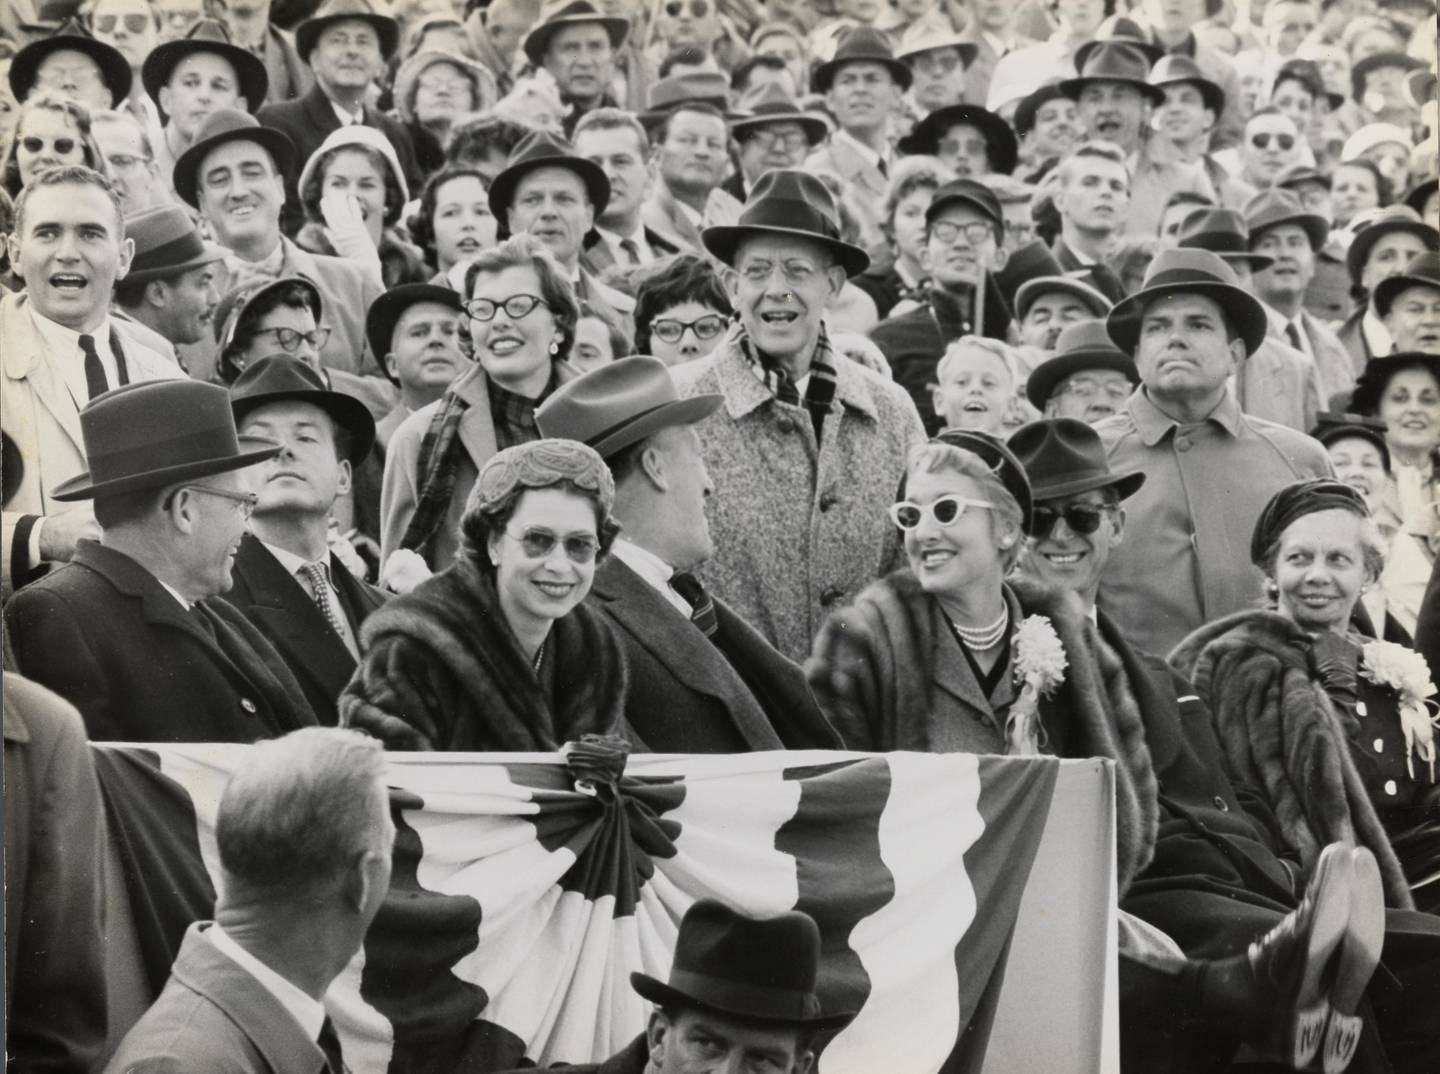 Queen Elizabeth II smiles as she sits in the stands at a football game between the University of Maryland and the University of North Carolina, October 19, 1957. In her row, from left to right: University of Maryland President Wilson Elkins, the Queen, Governor Theodore McKeldin, Mrs. Dorothy Elkins, and Prince Philip, Duke of Edinburgh. Courtesy of University of Maryland Archives.